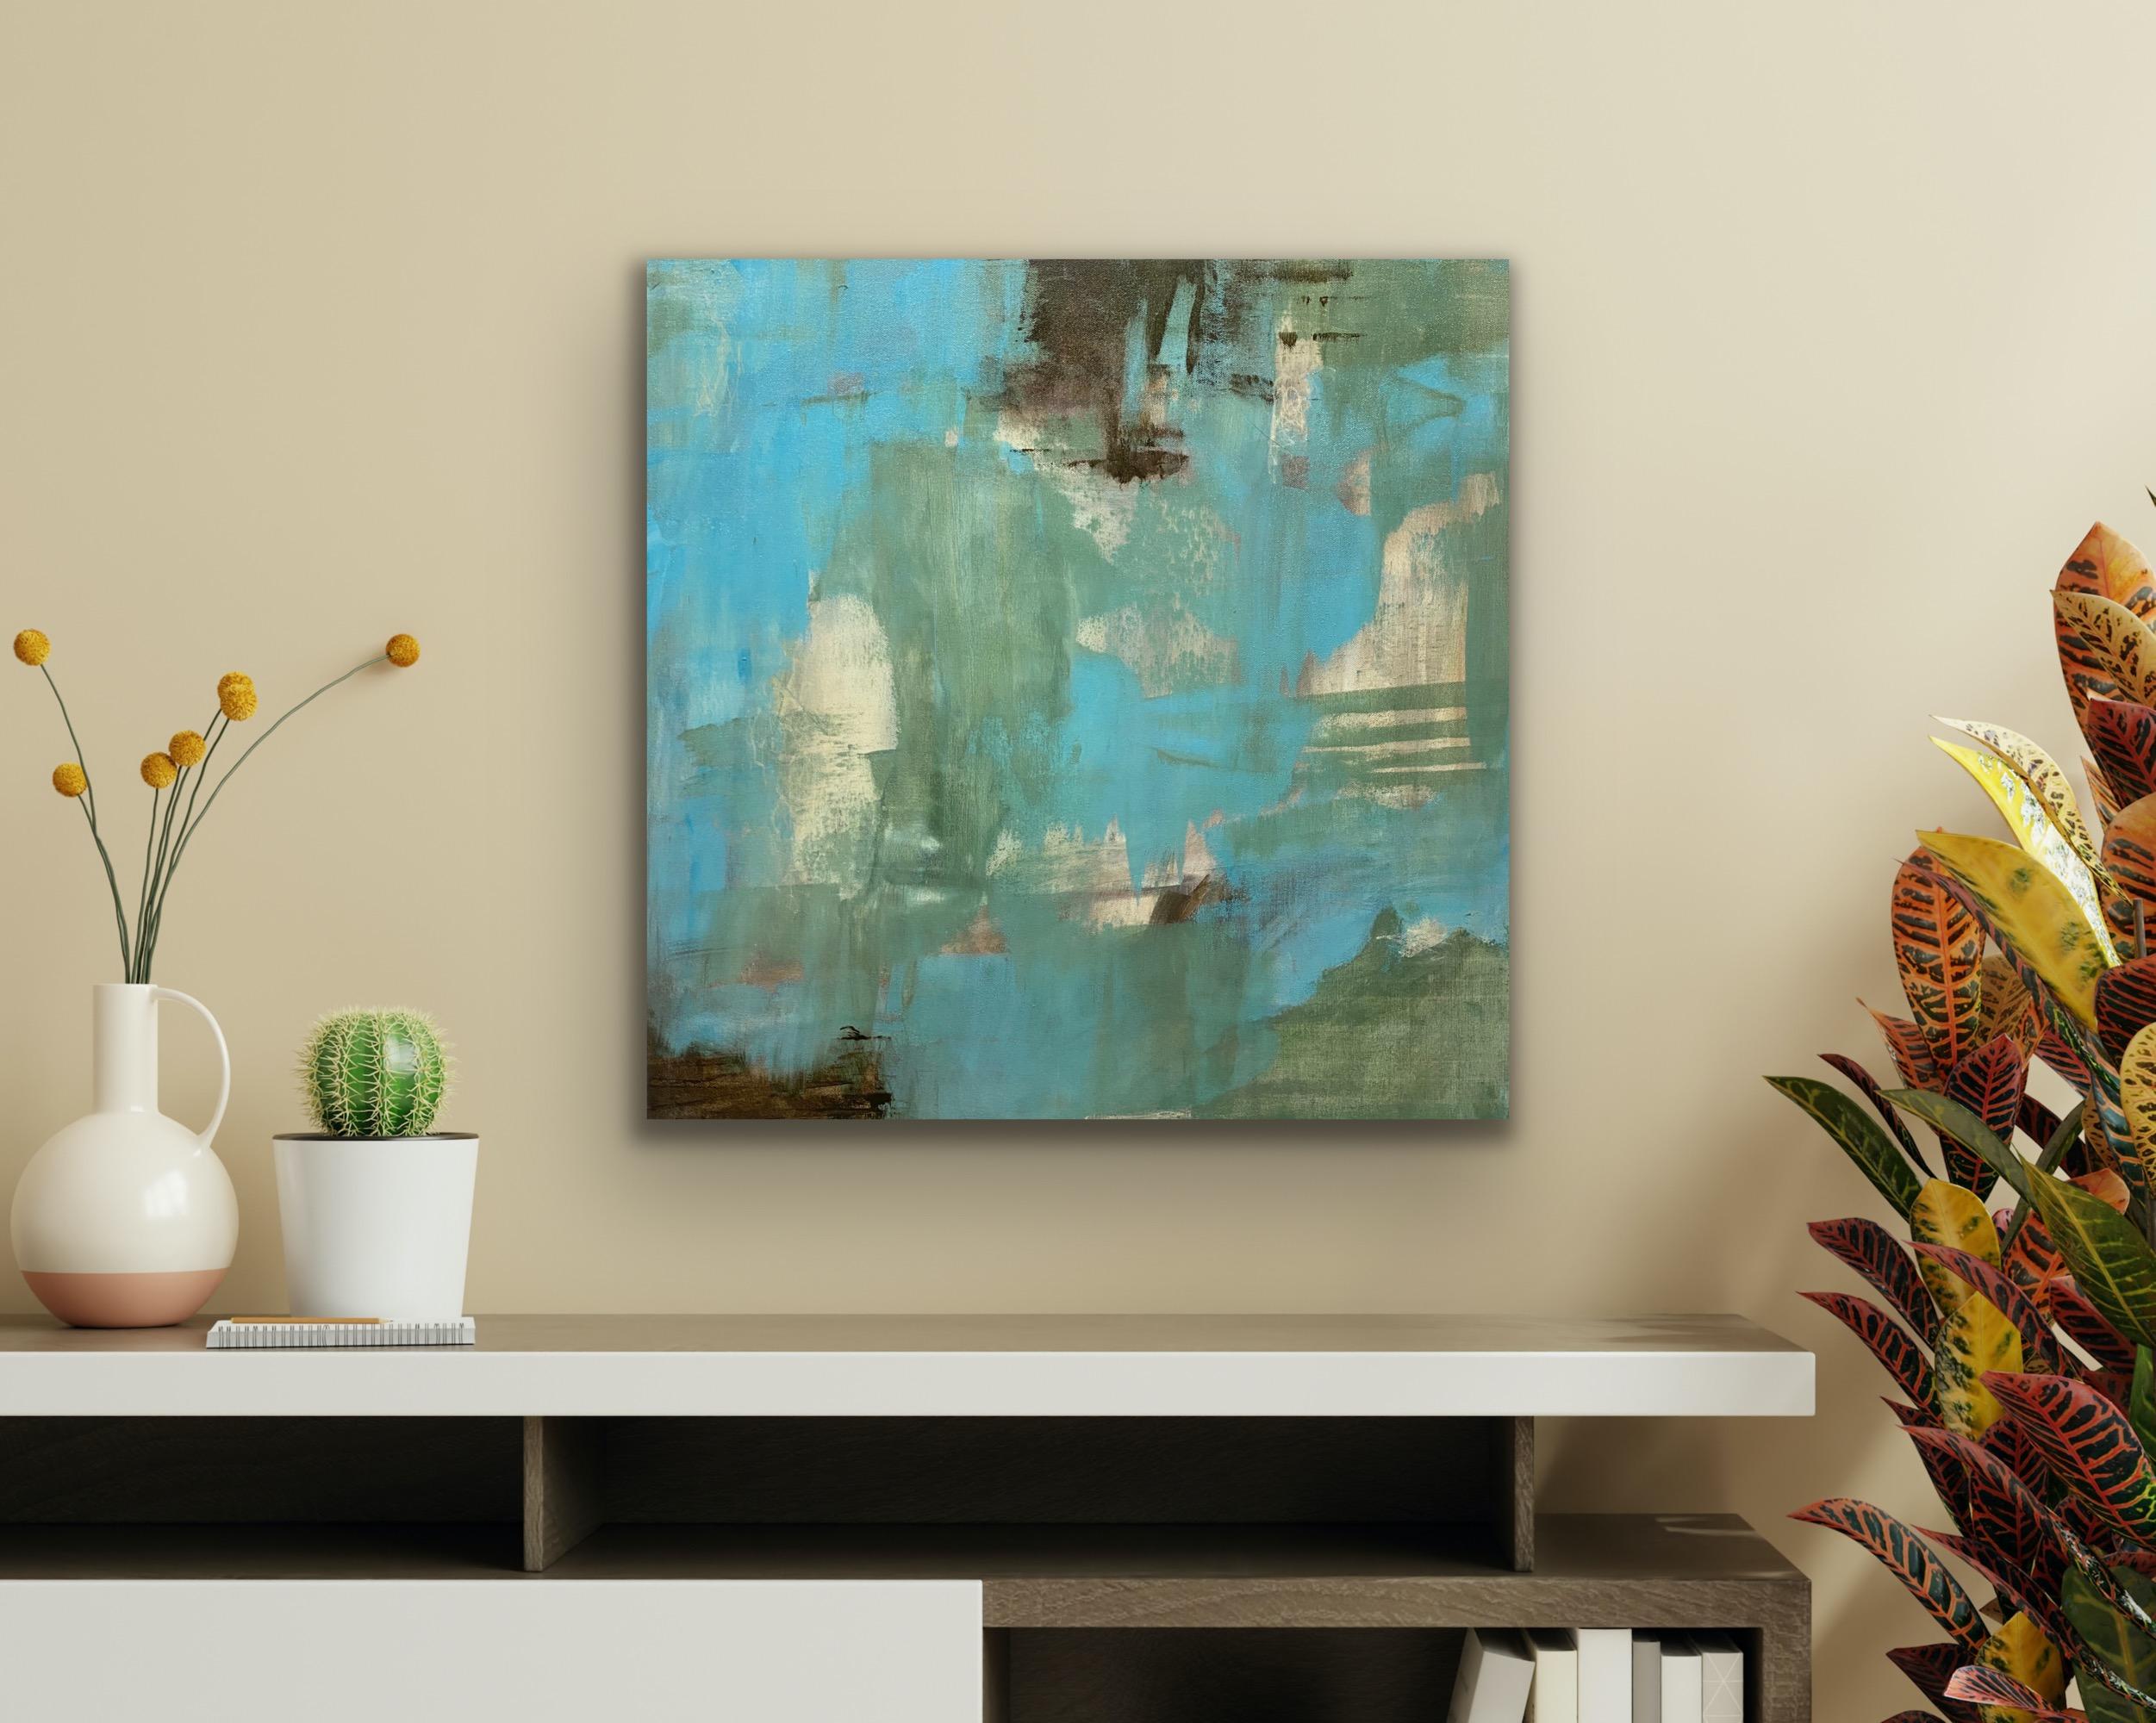 Down home, Contemporary abstract, teal, green, brown, white - Gray Abstract Painting by Juanita Bellavance 